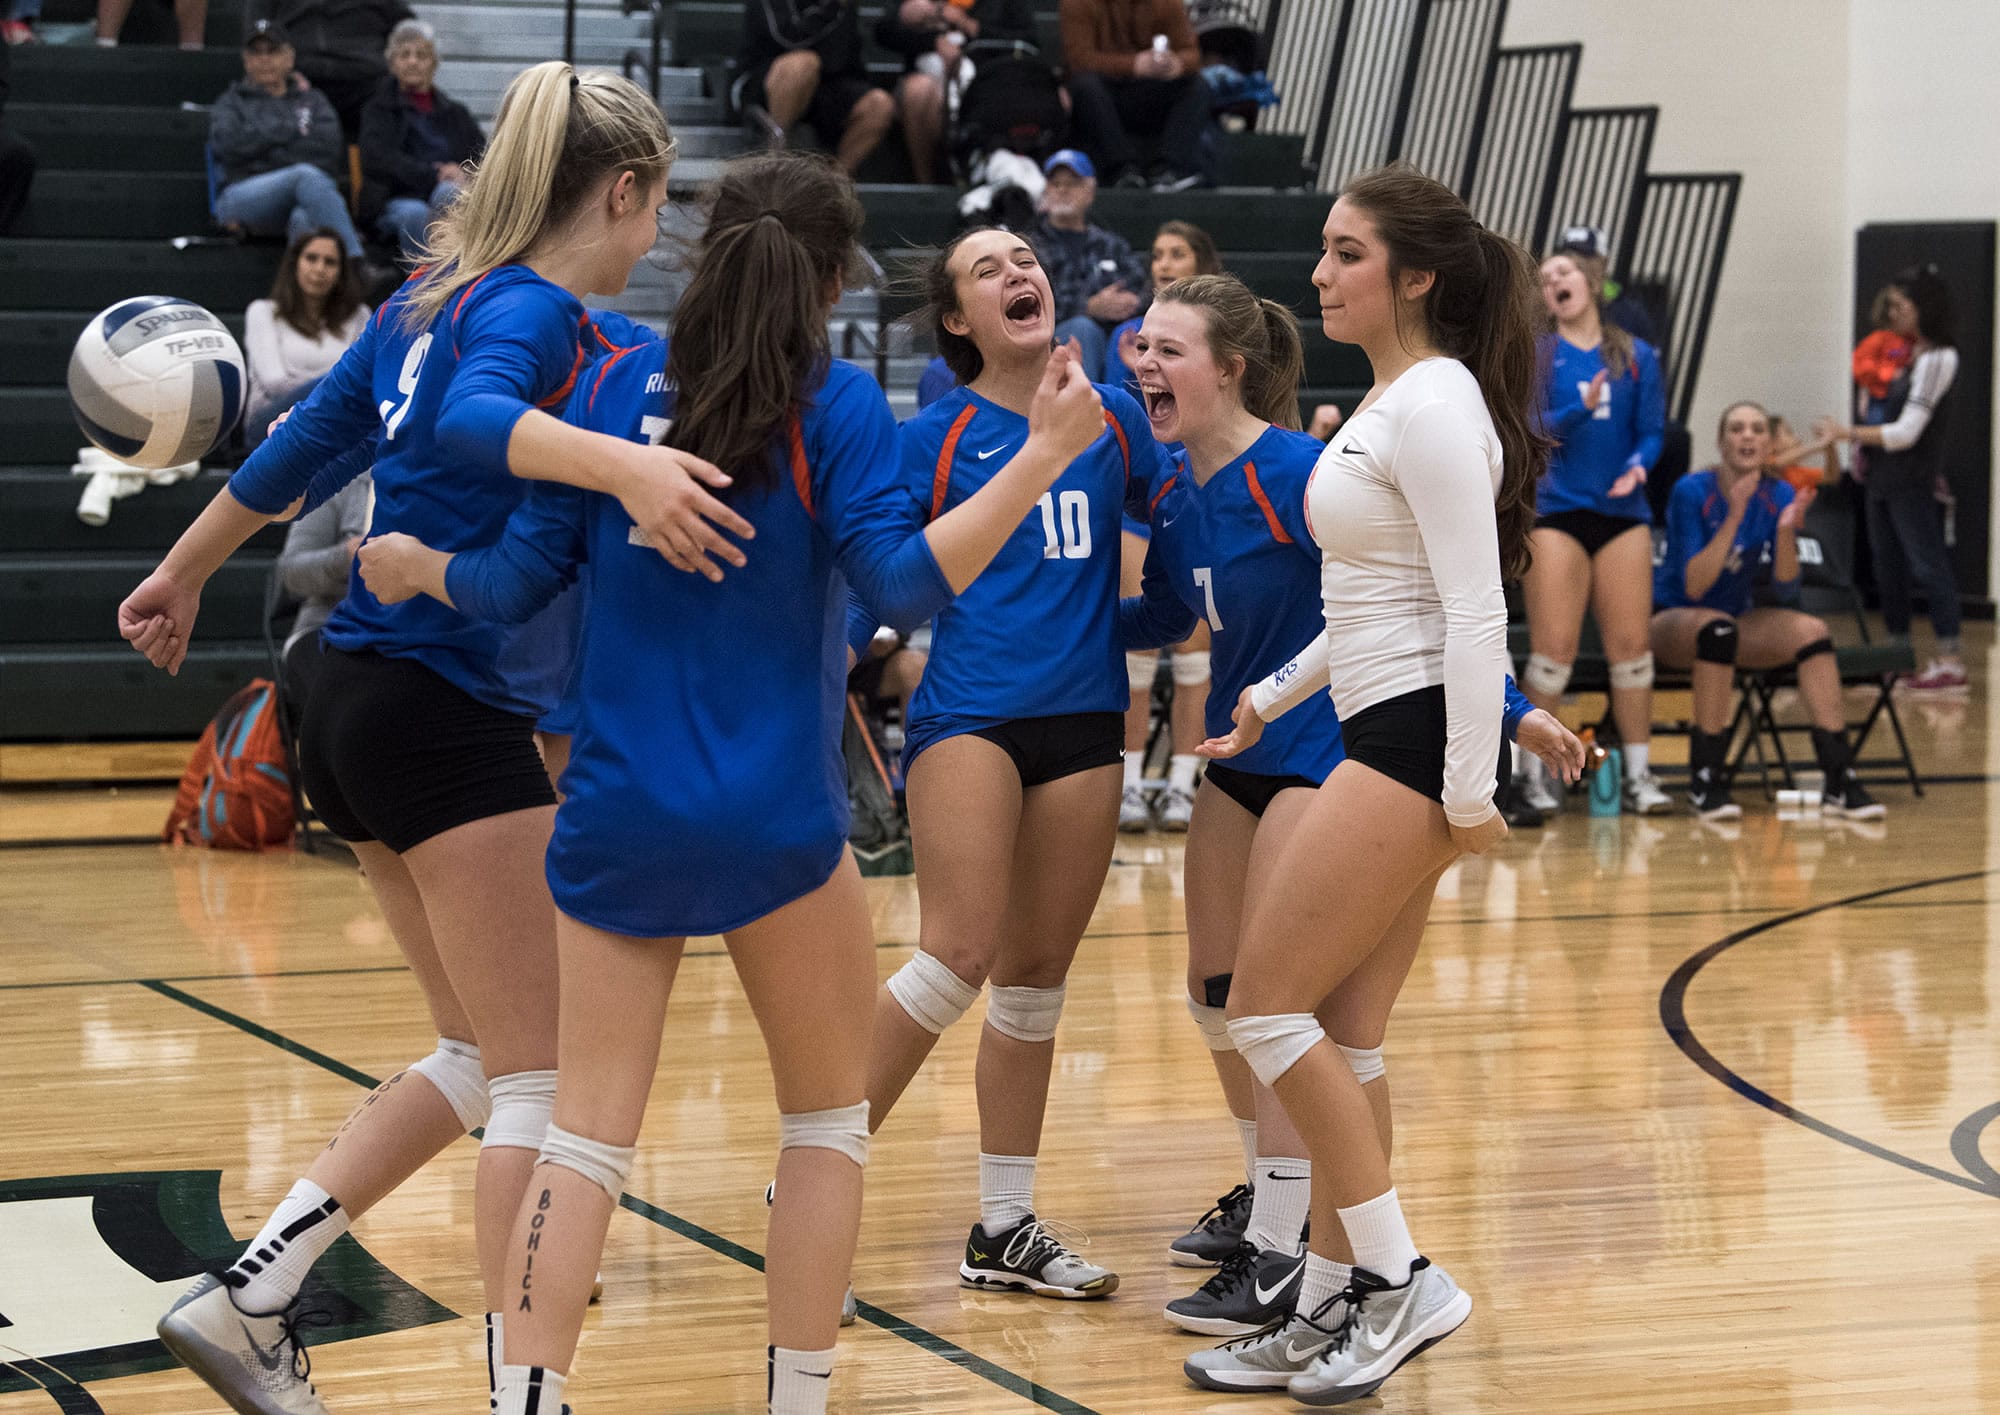 Ridgefield celebrates a point during the match at Woodland High School on Tuesday evening, Oct. 17, 2017. Woodland won the match 3-1.